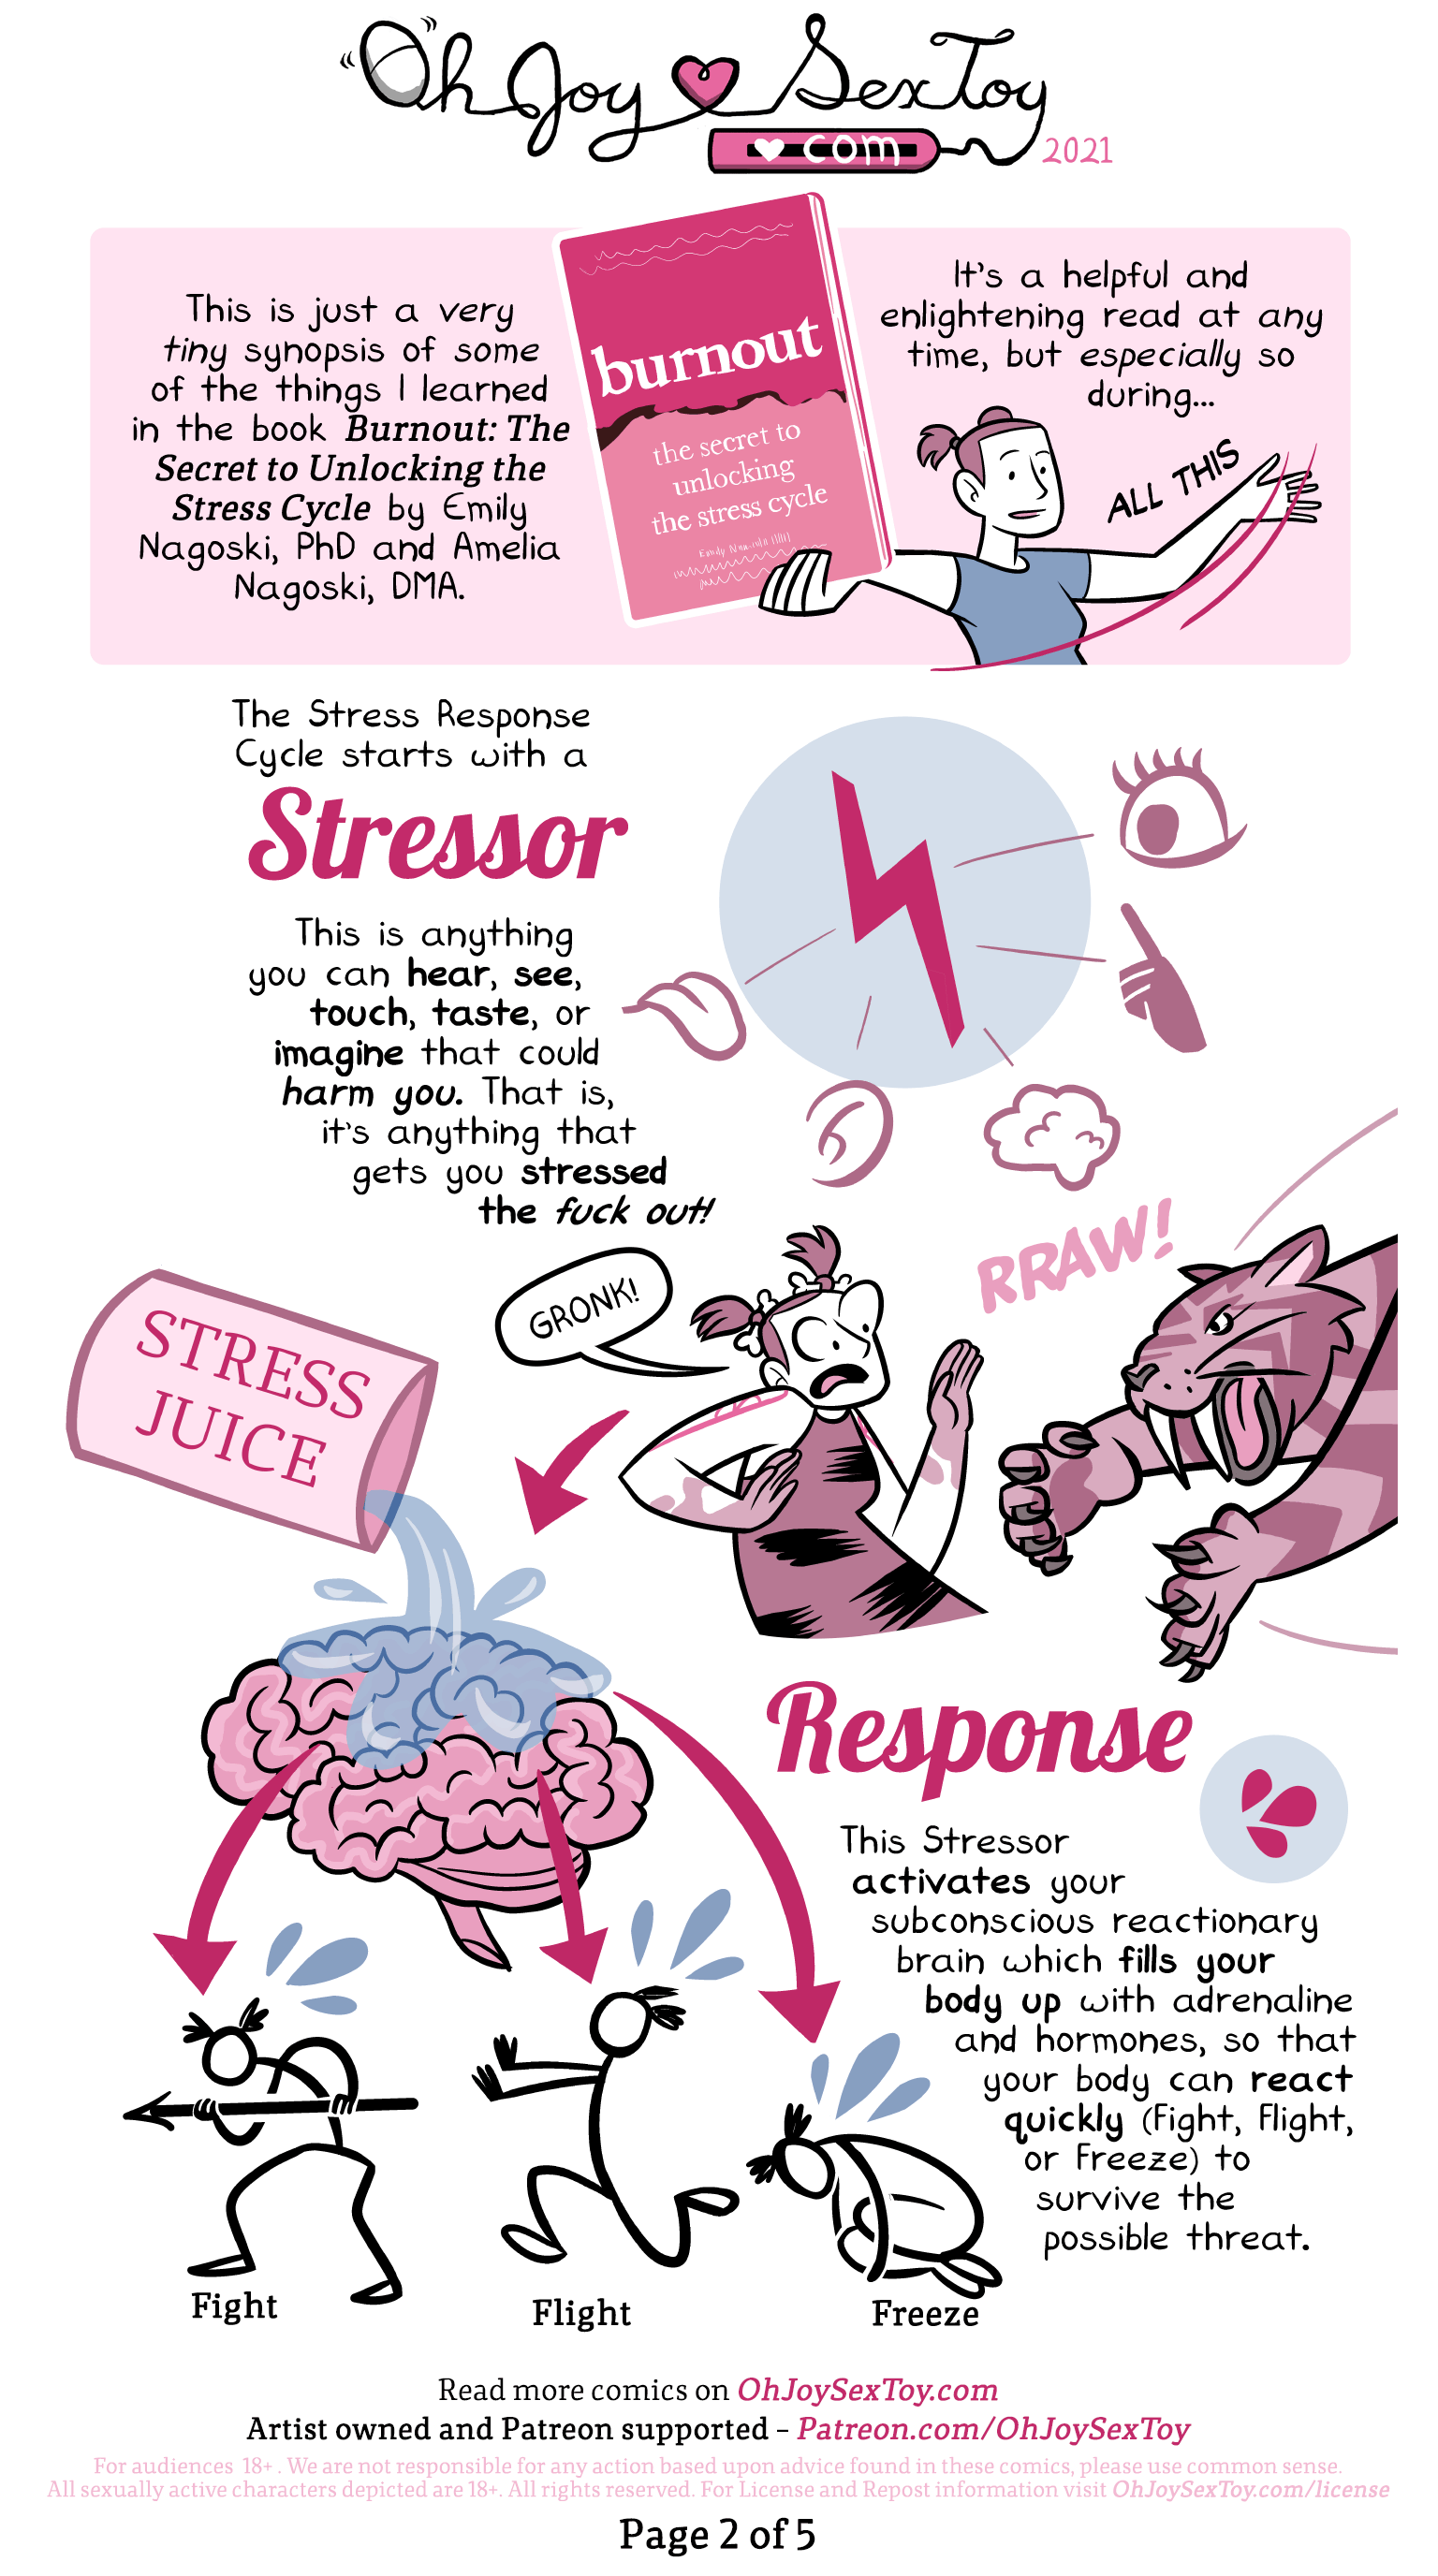 The Stress Response Cycle